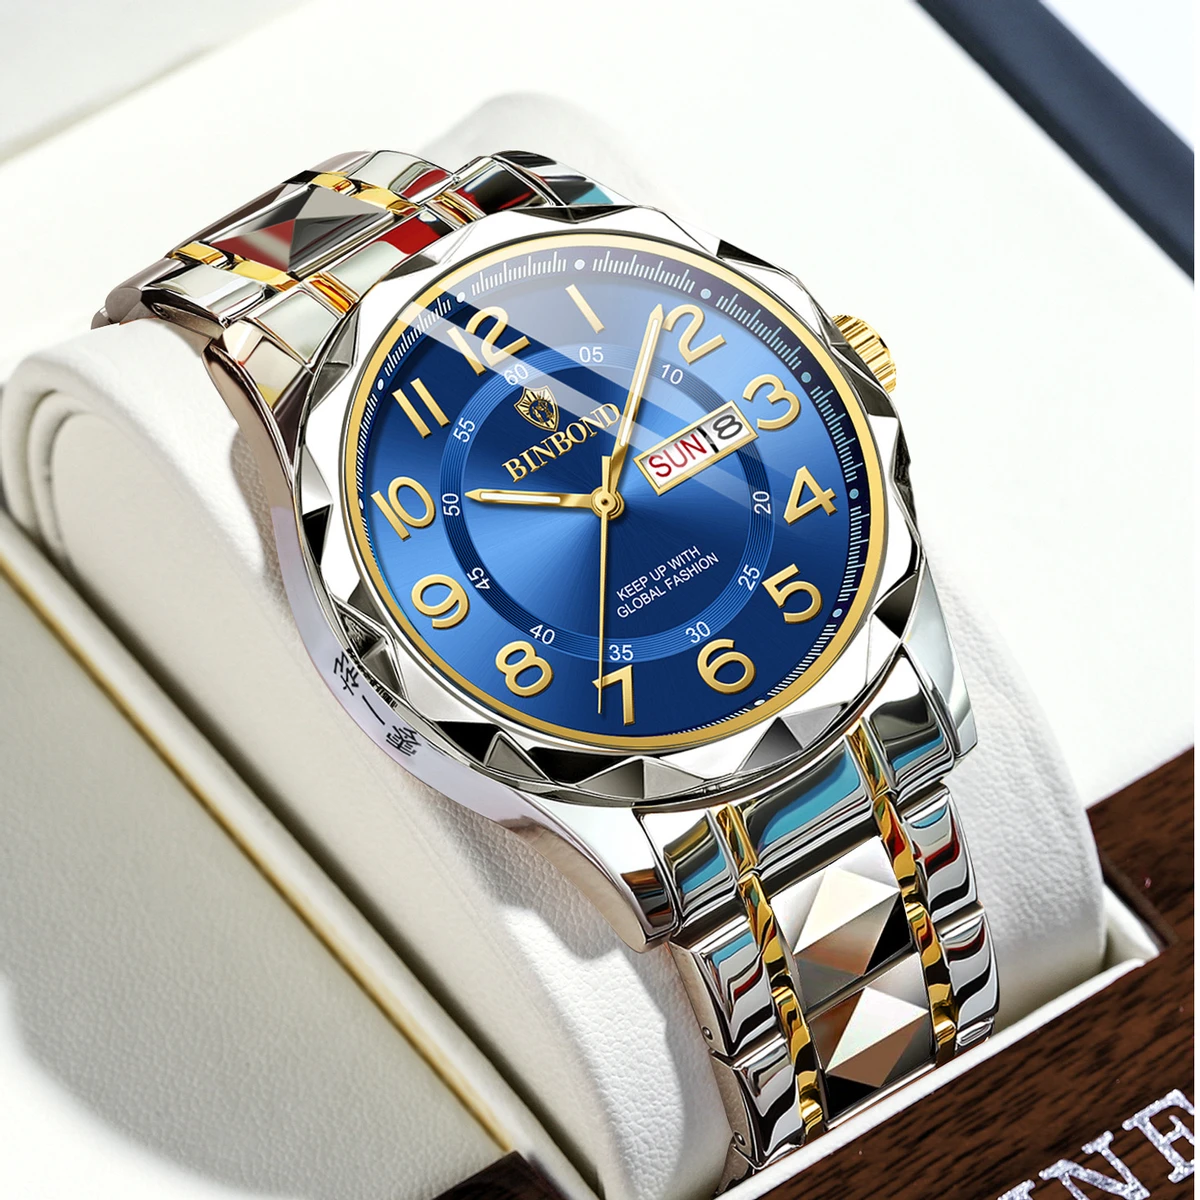 Luxury Binbond Dimon card Digain Stainless Steel Classic Waterproof Watch BINBOND MODEL 5663 CHAIN TOTON AR DIAL BLUE COOLER WATCH FOR MAN